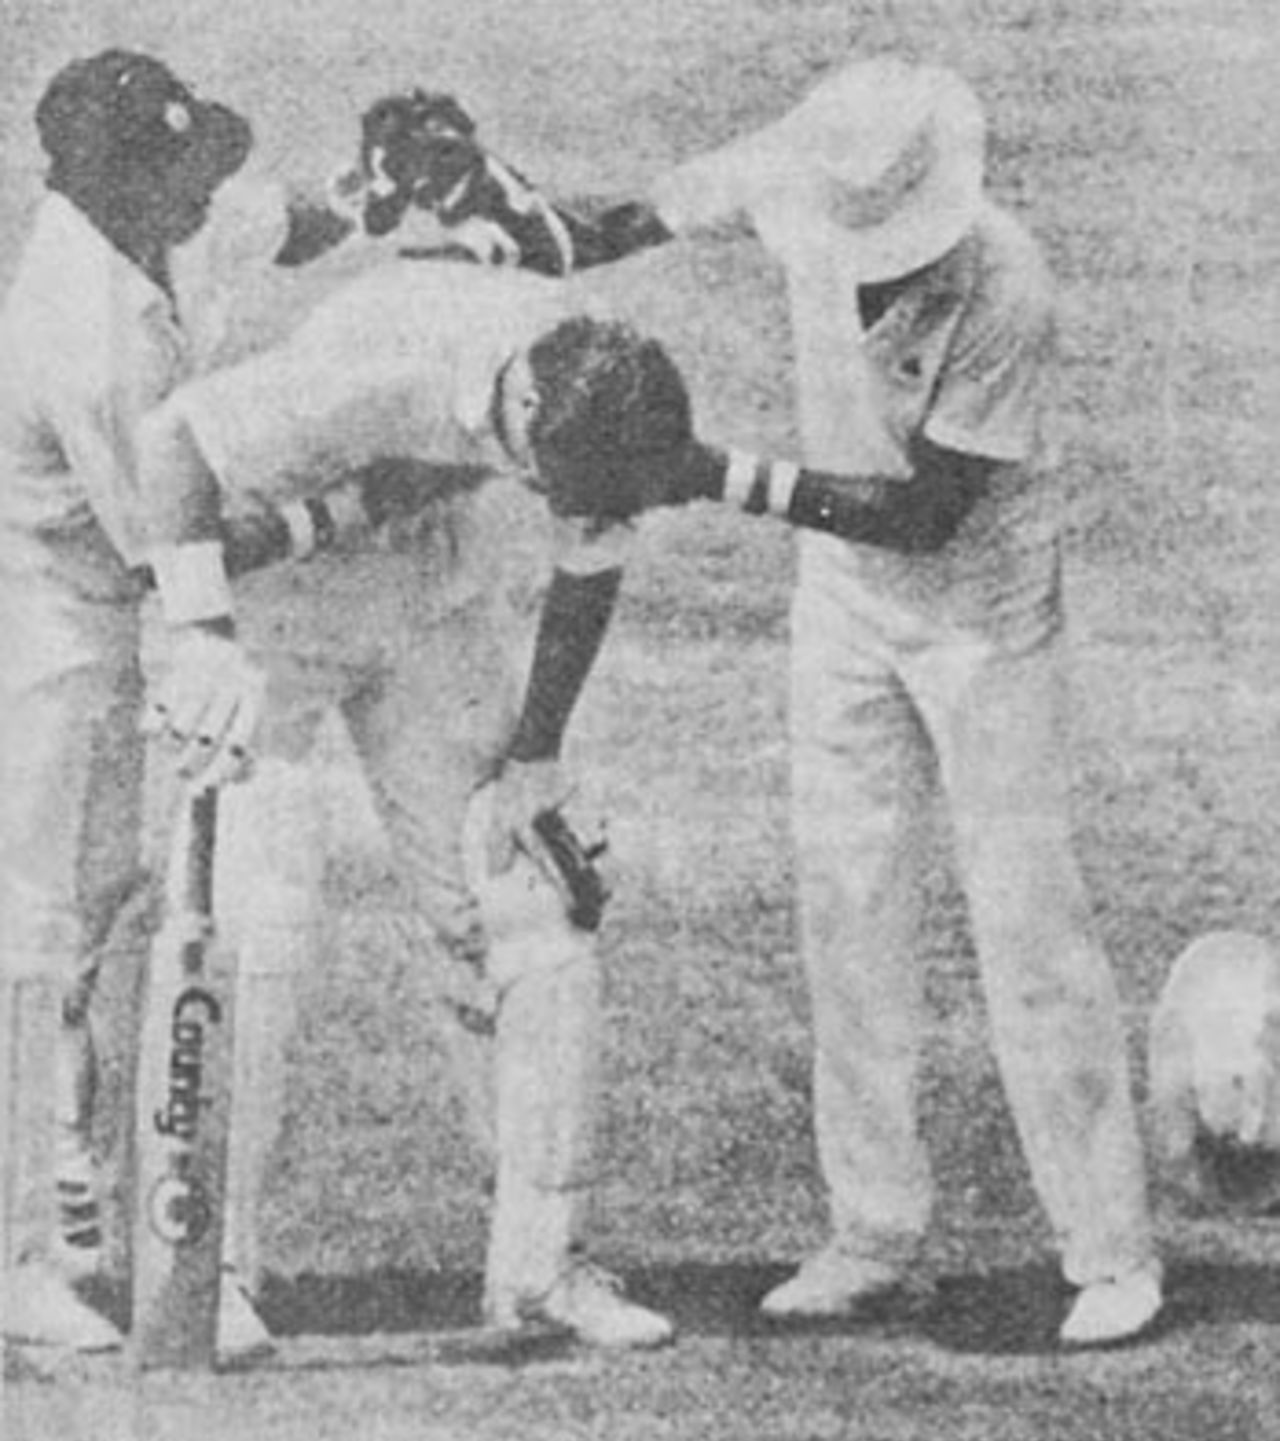 Dean Jones throws up on the pitch during his epic 503-minute double hundred, India v Australia, Madras, 1986-87